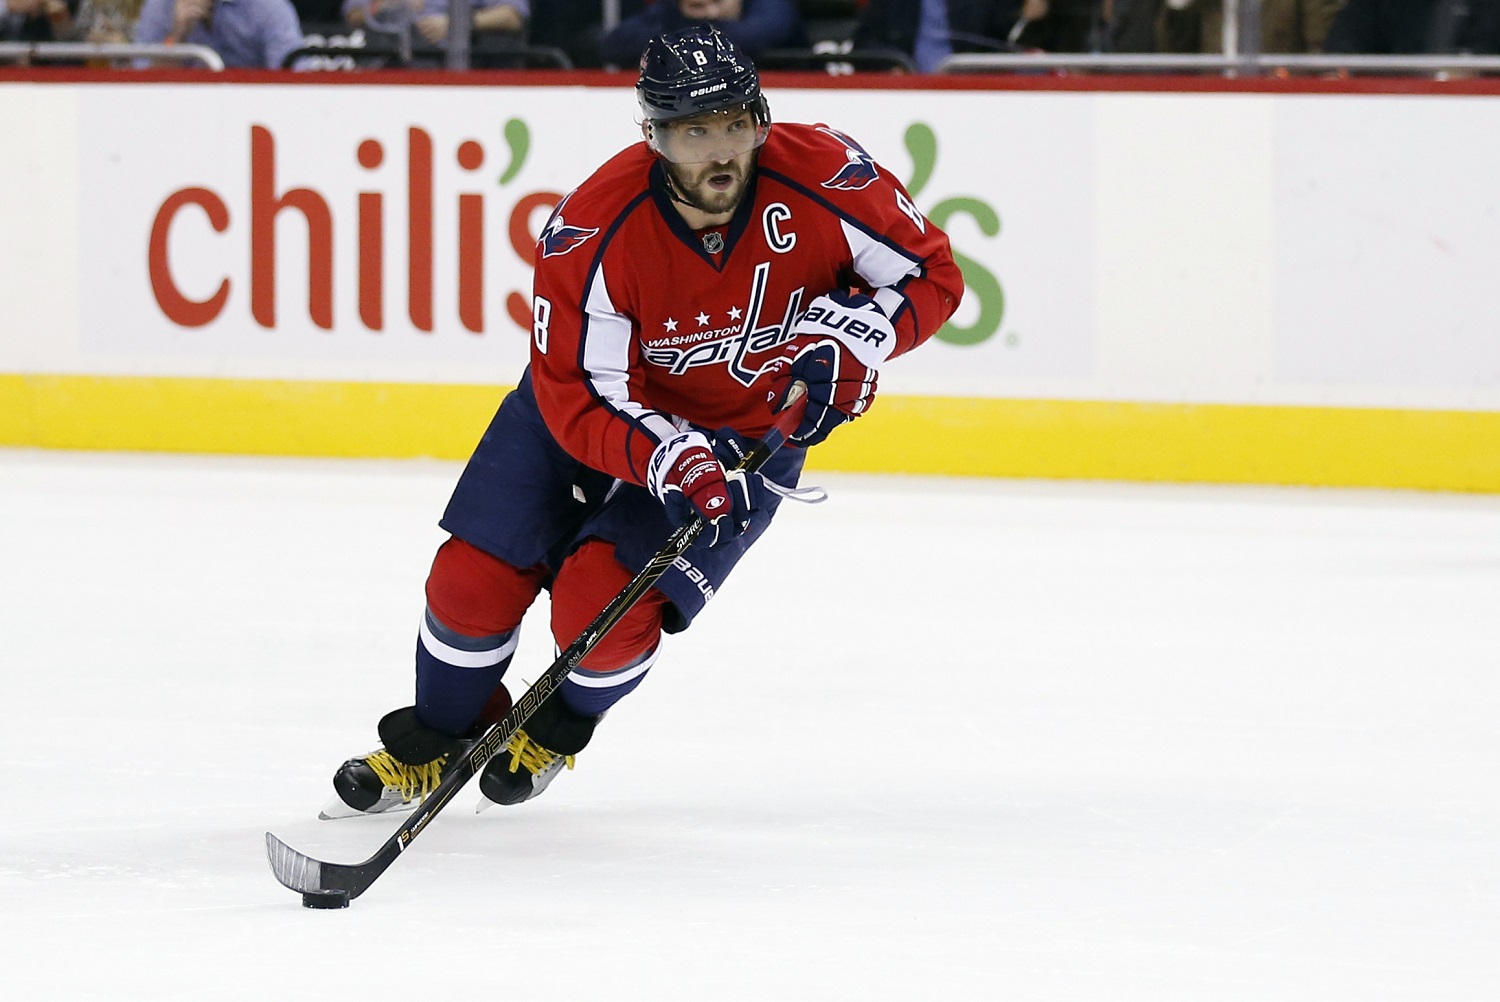 Capitals’ Ovechkin to miss All-Star Game due to injury